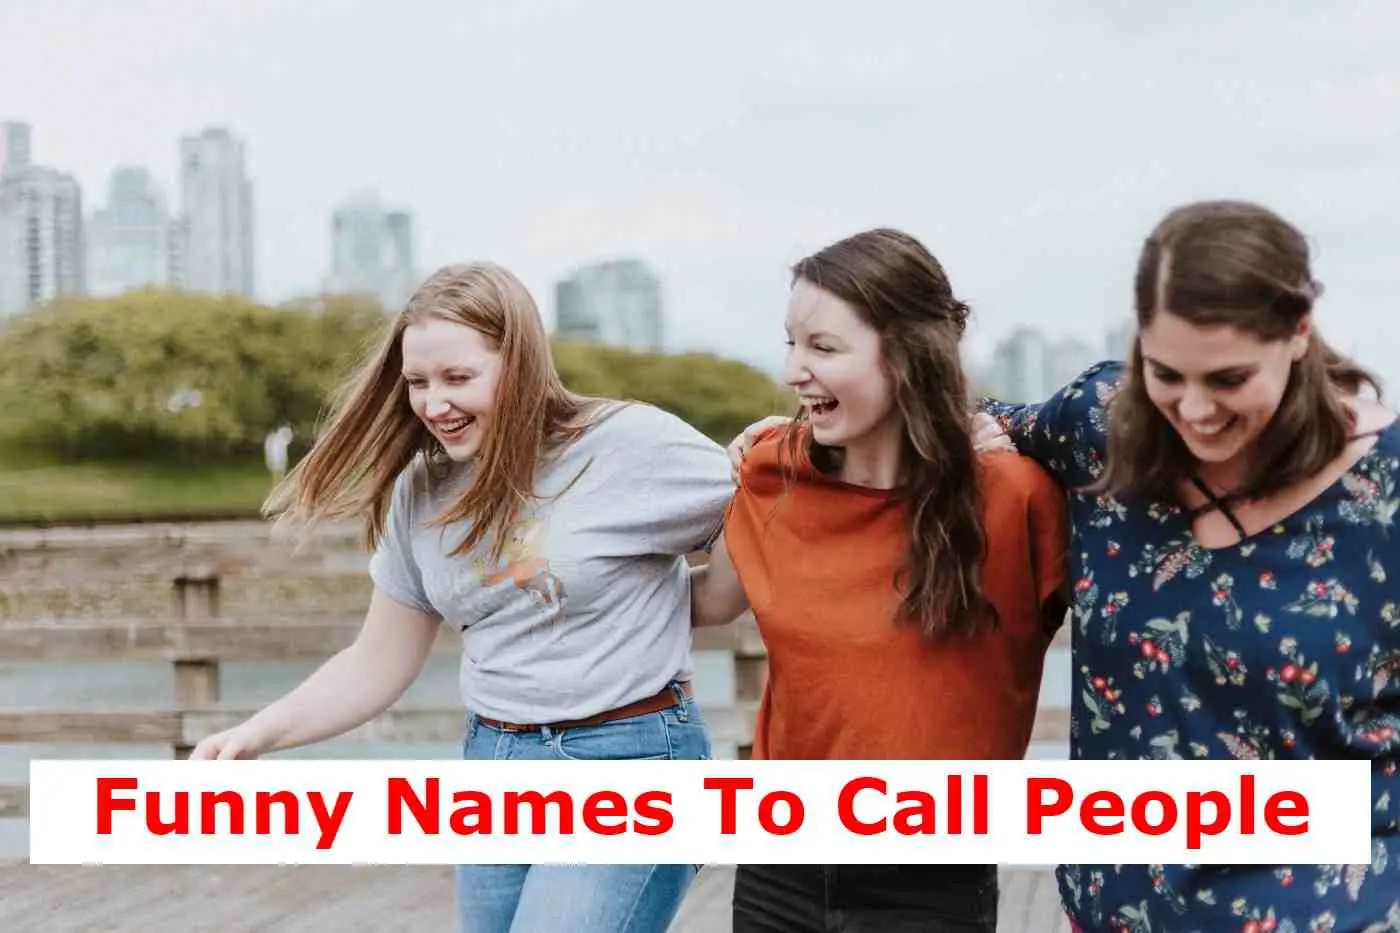 150+ Amazing Funny Names To Call People In 2022